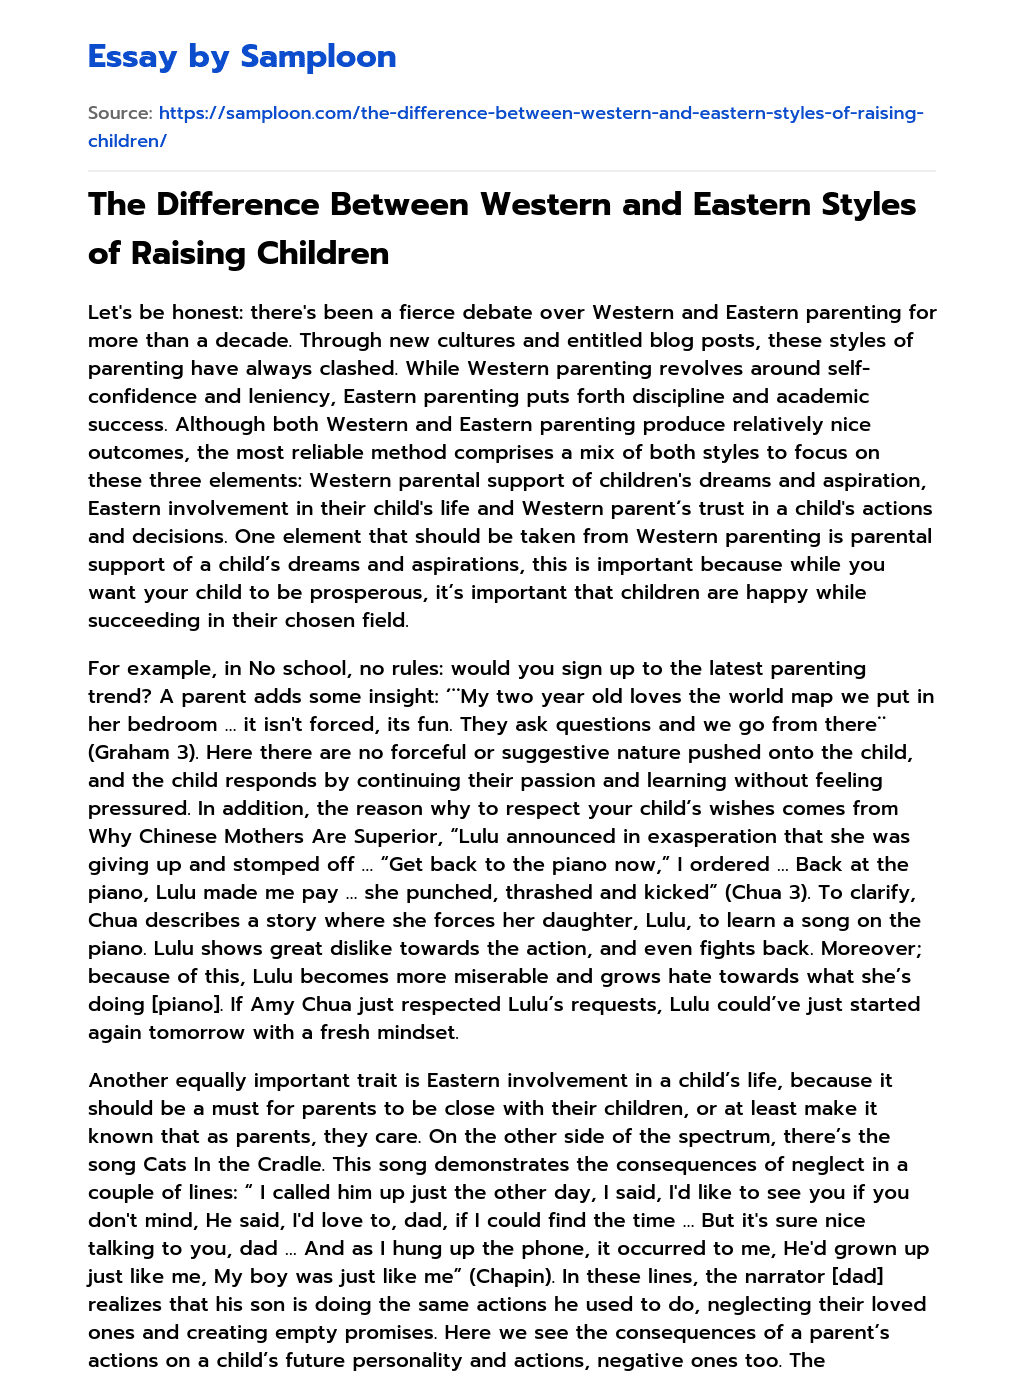 The Difference Between Western and Eastern Styles of Raising Children essay